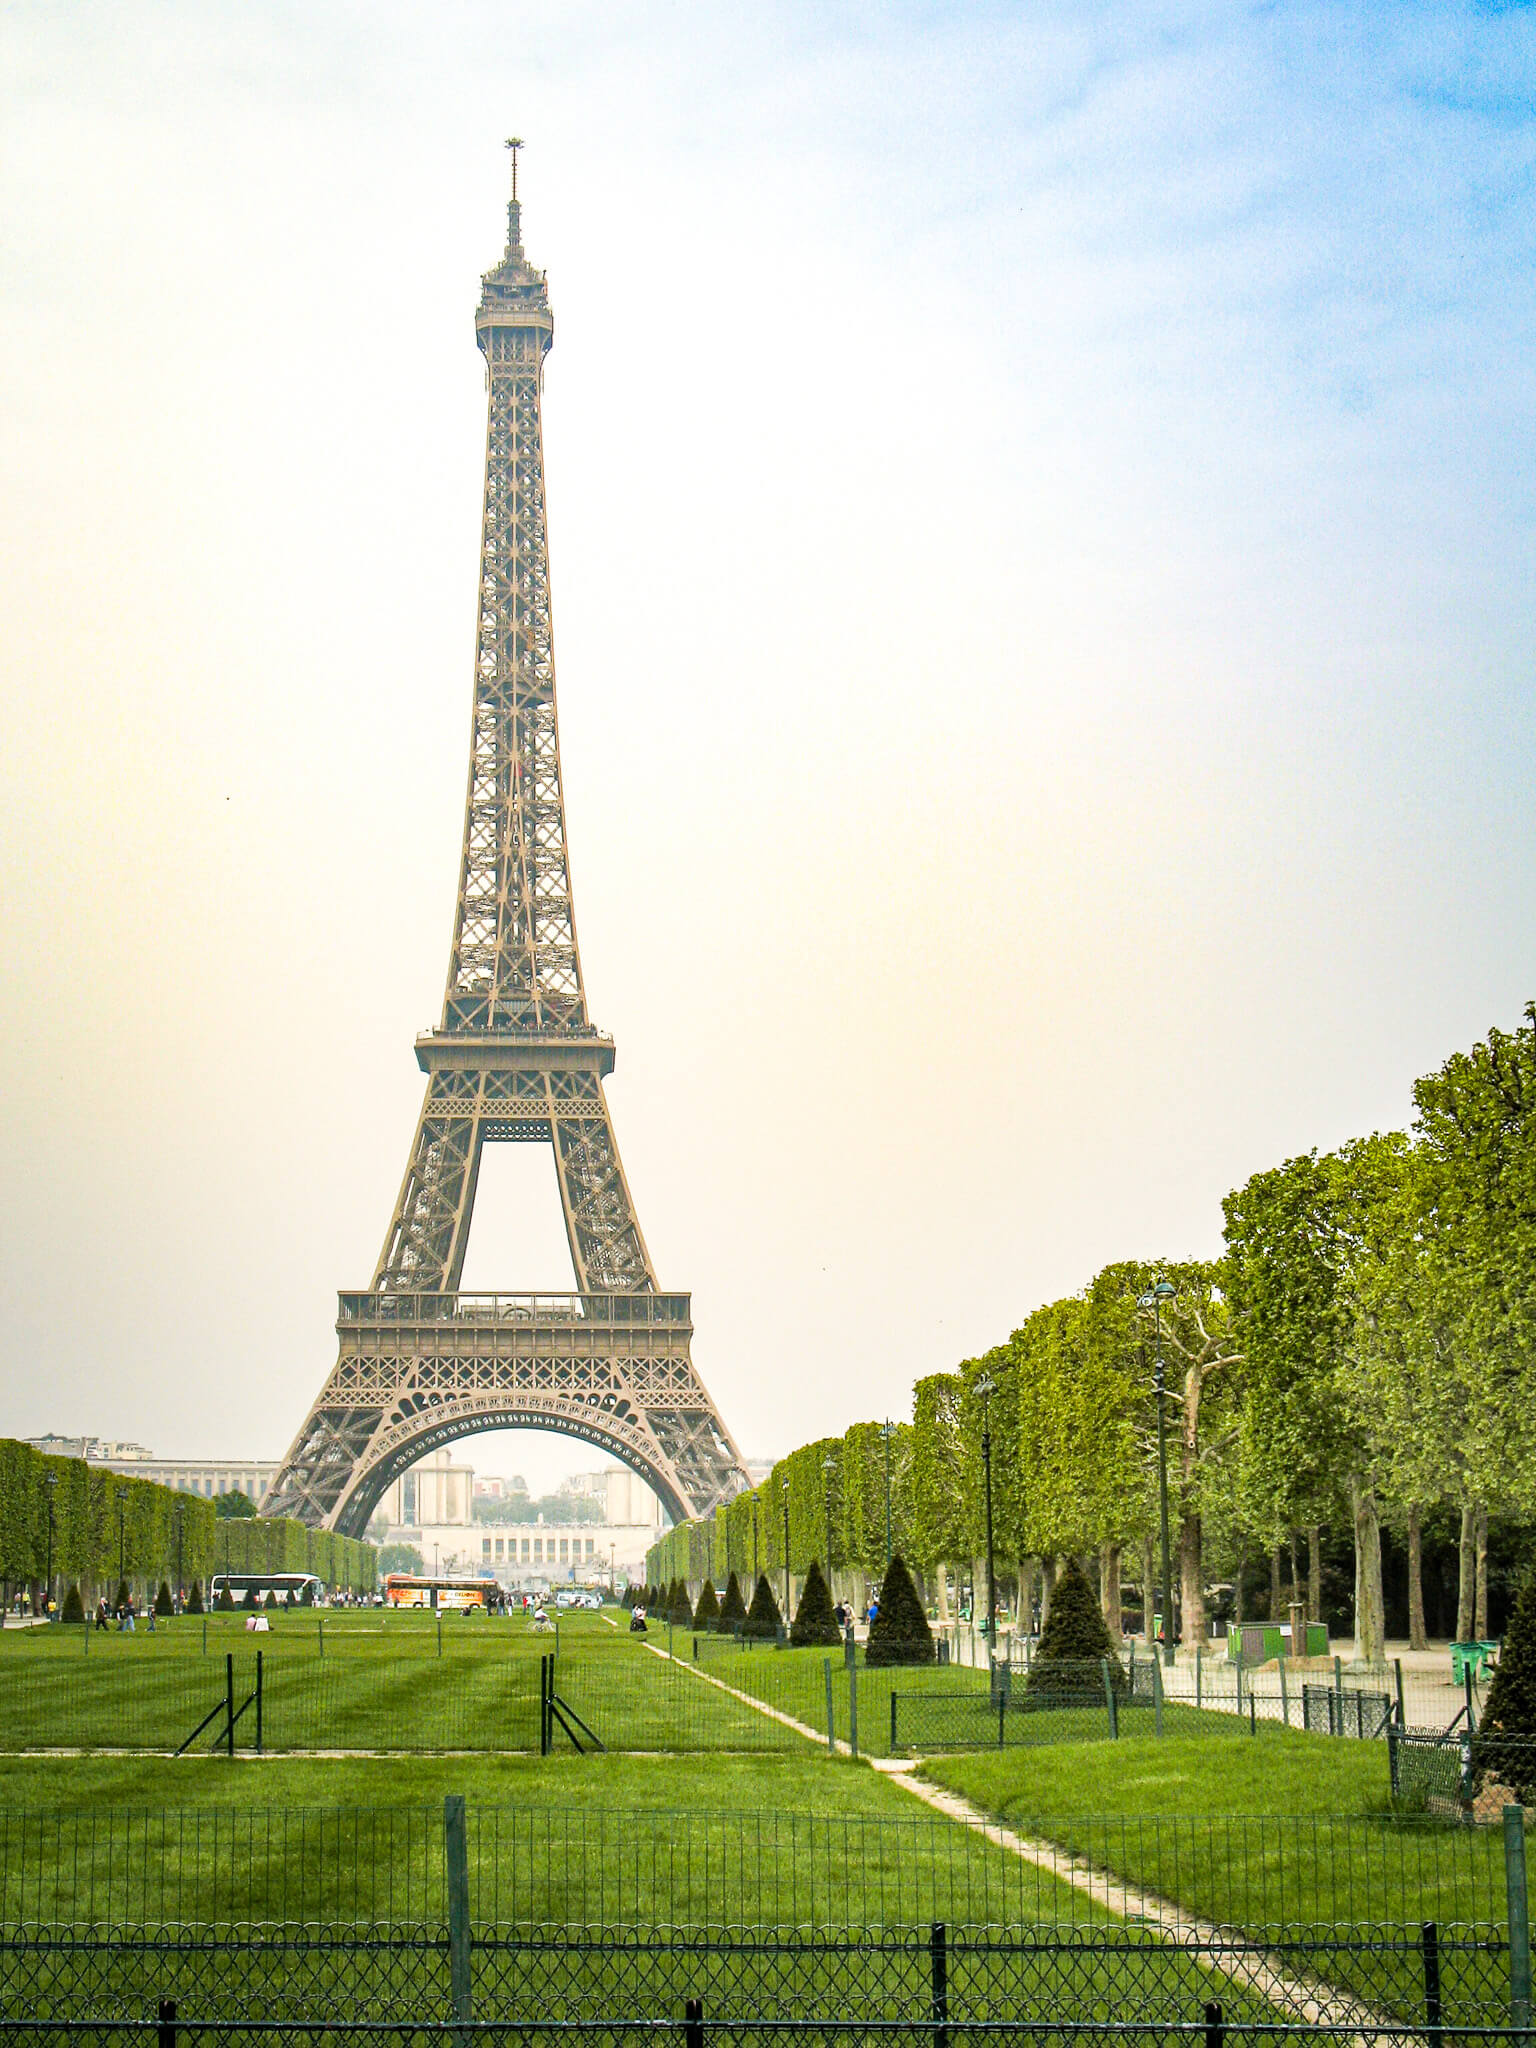 The Eiffel Tower viewed from the Champ de Mars